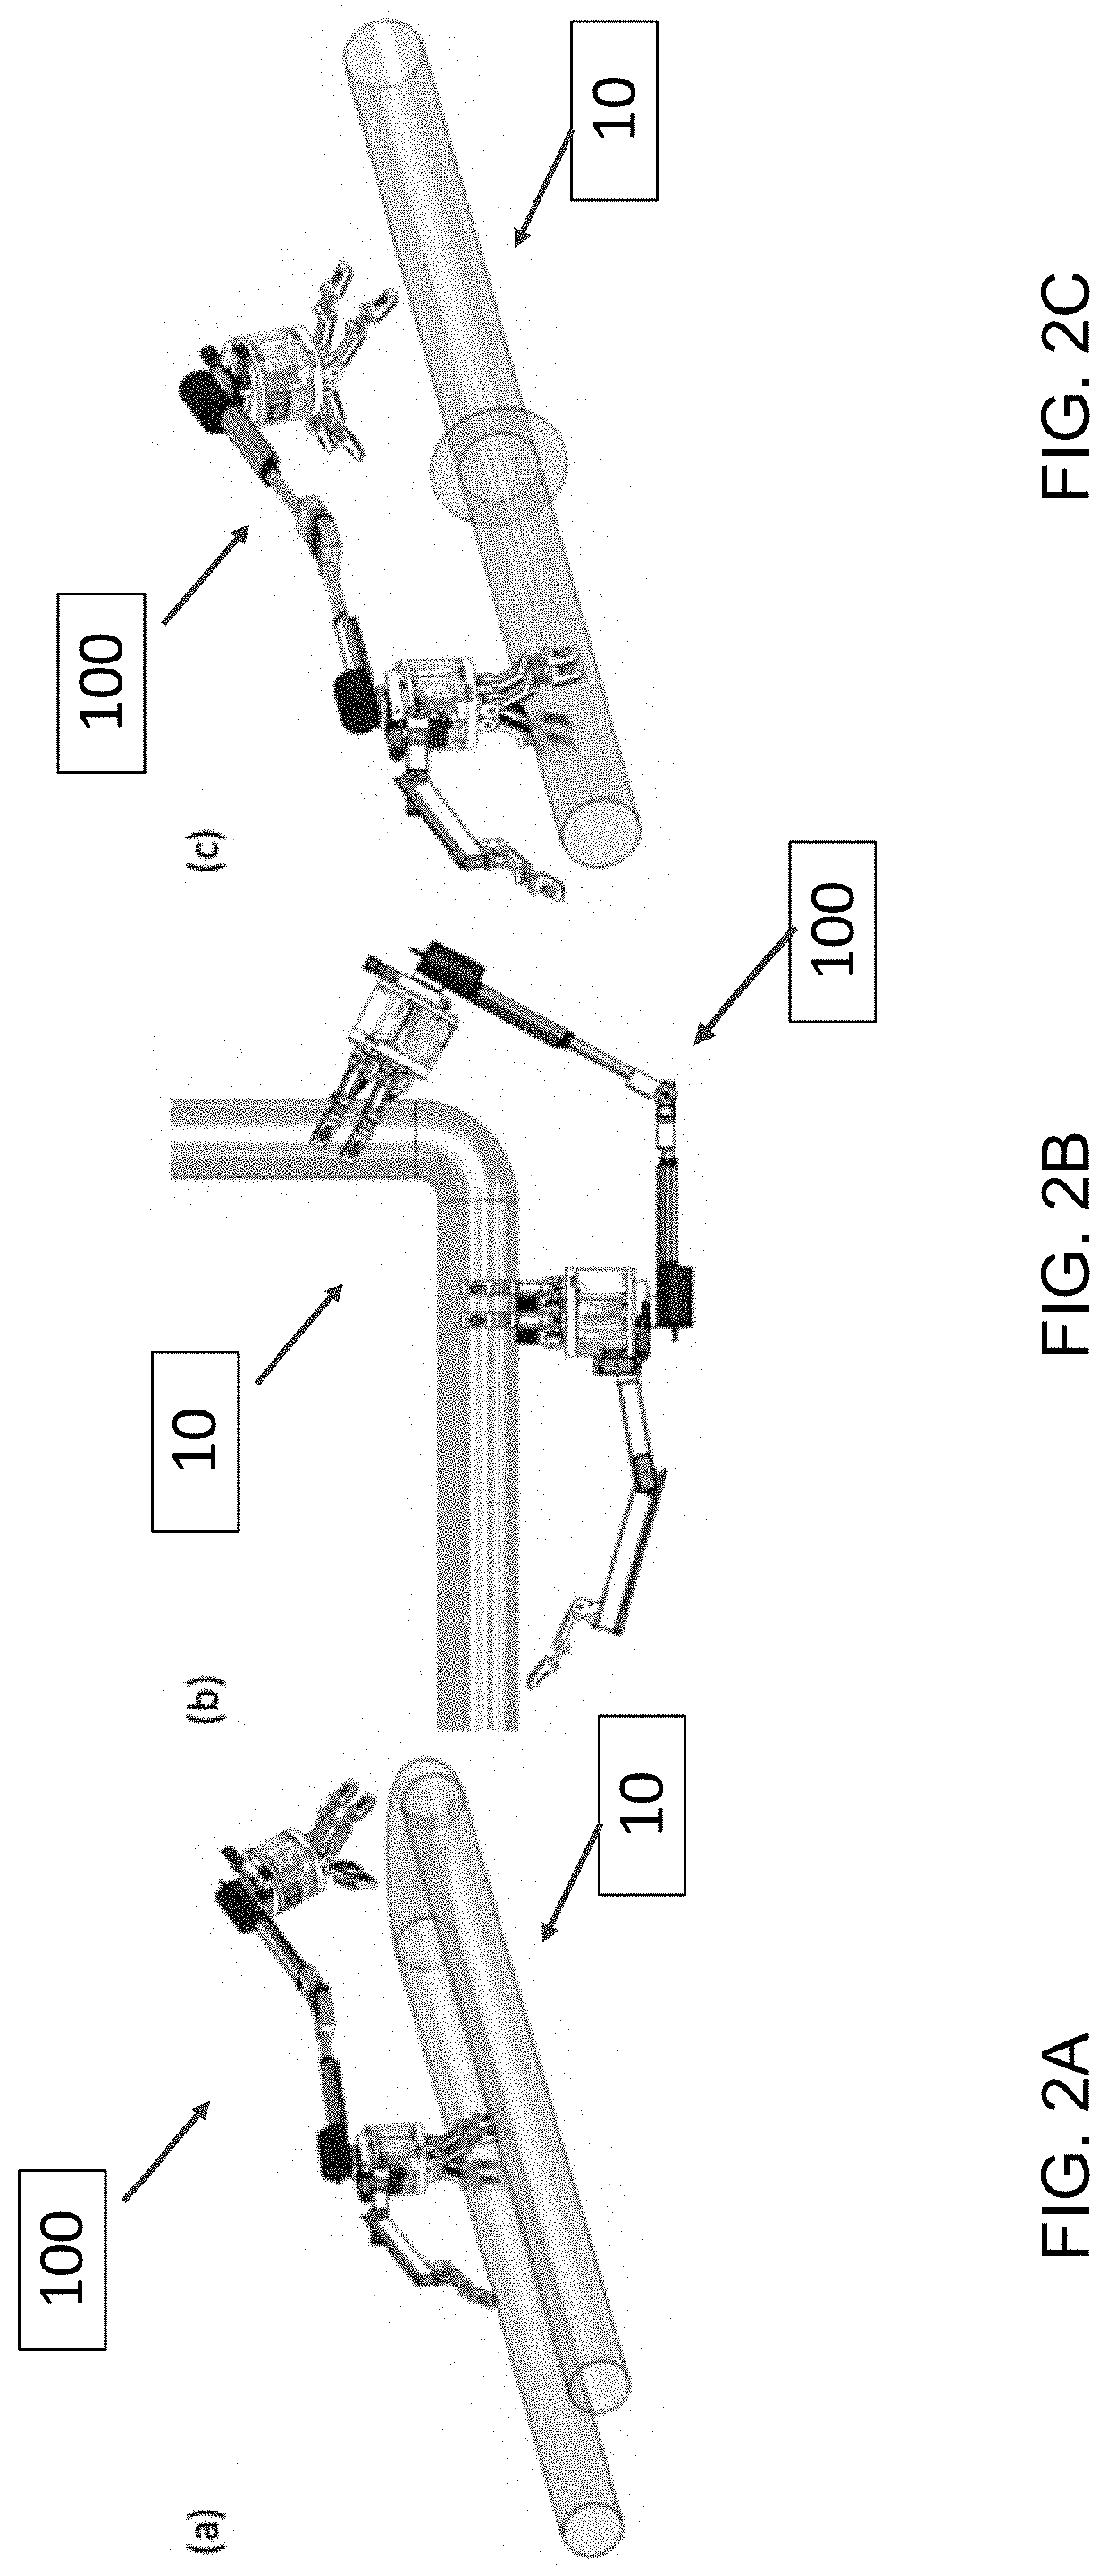 Systems and methods for robotic sensing, repair and inspection